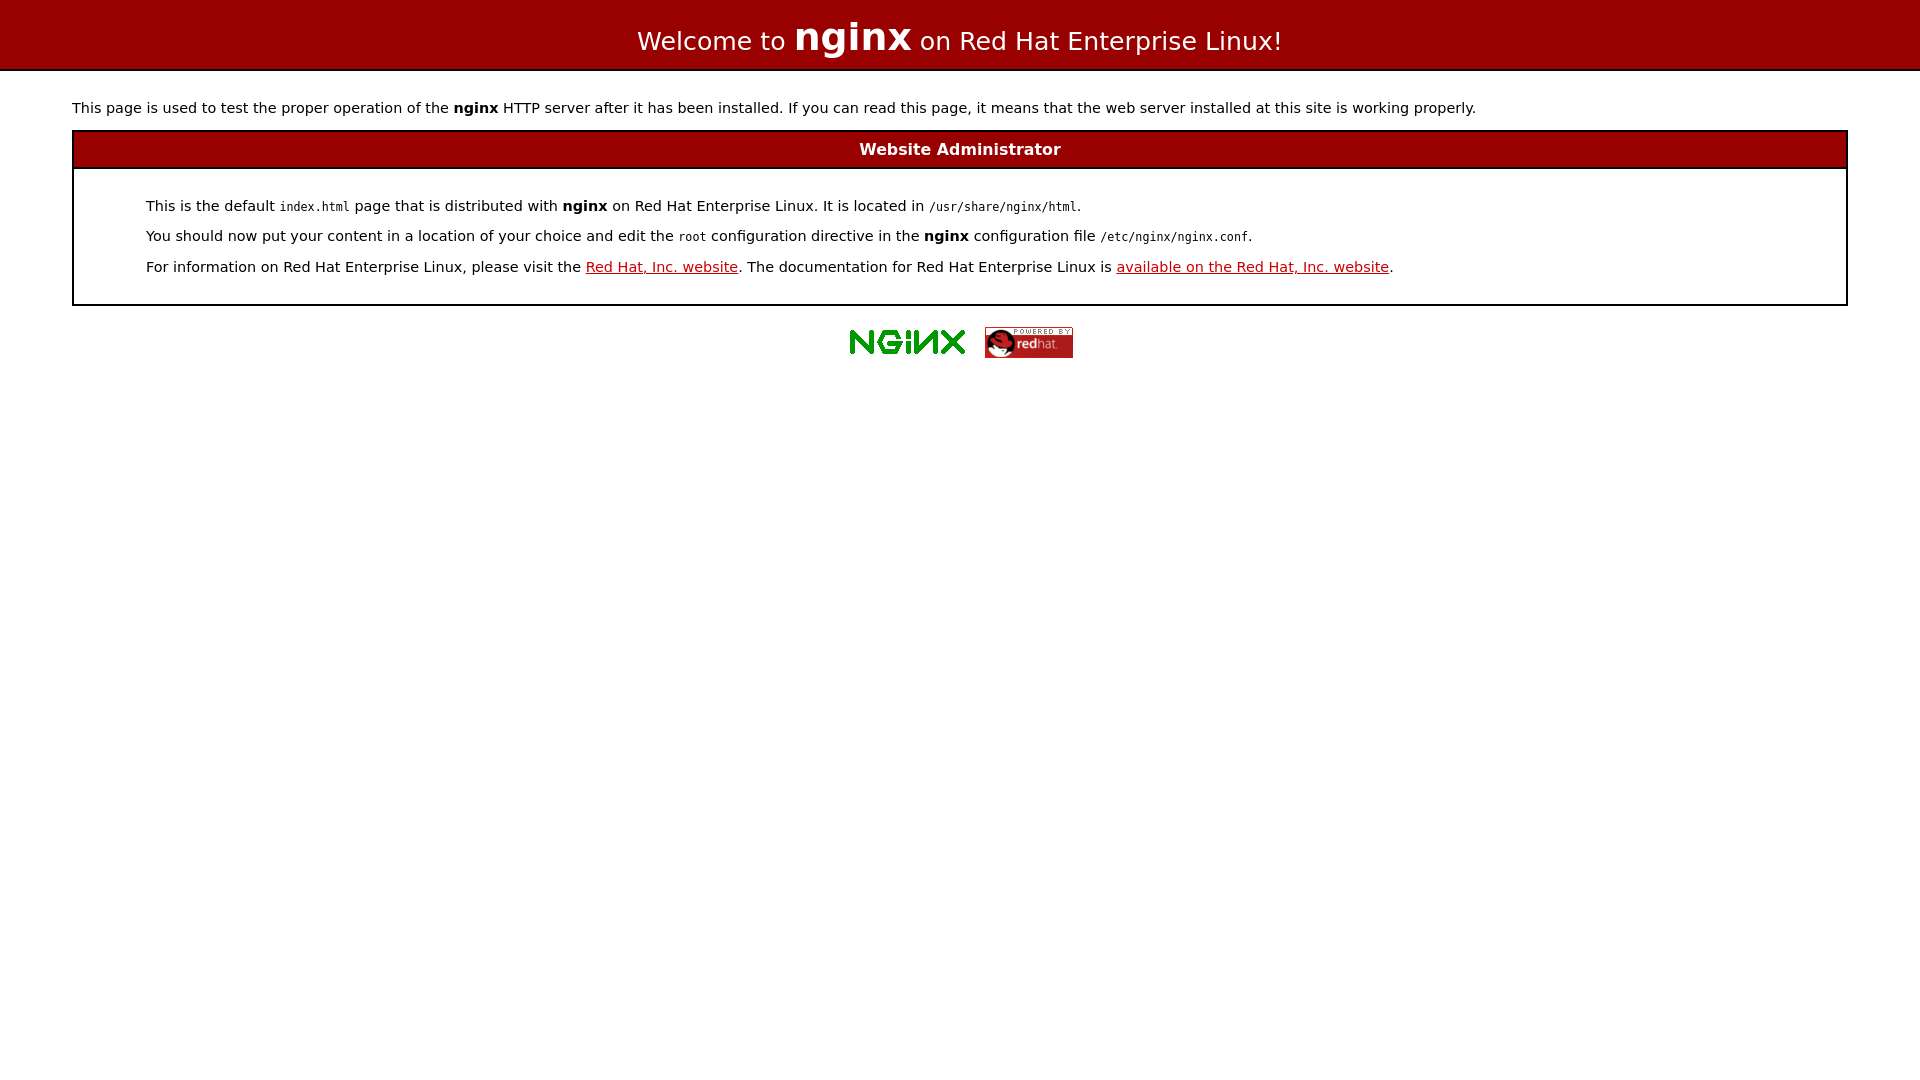 Test Page for the Nginx HTTP Server on Red Hat Enterprise Linux截图时间：2023-09-27